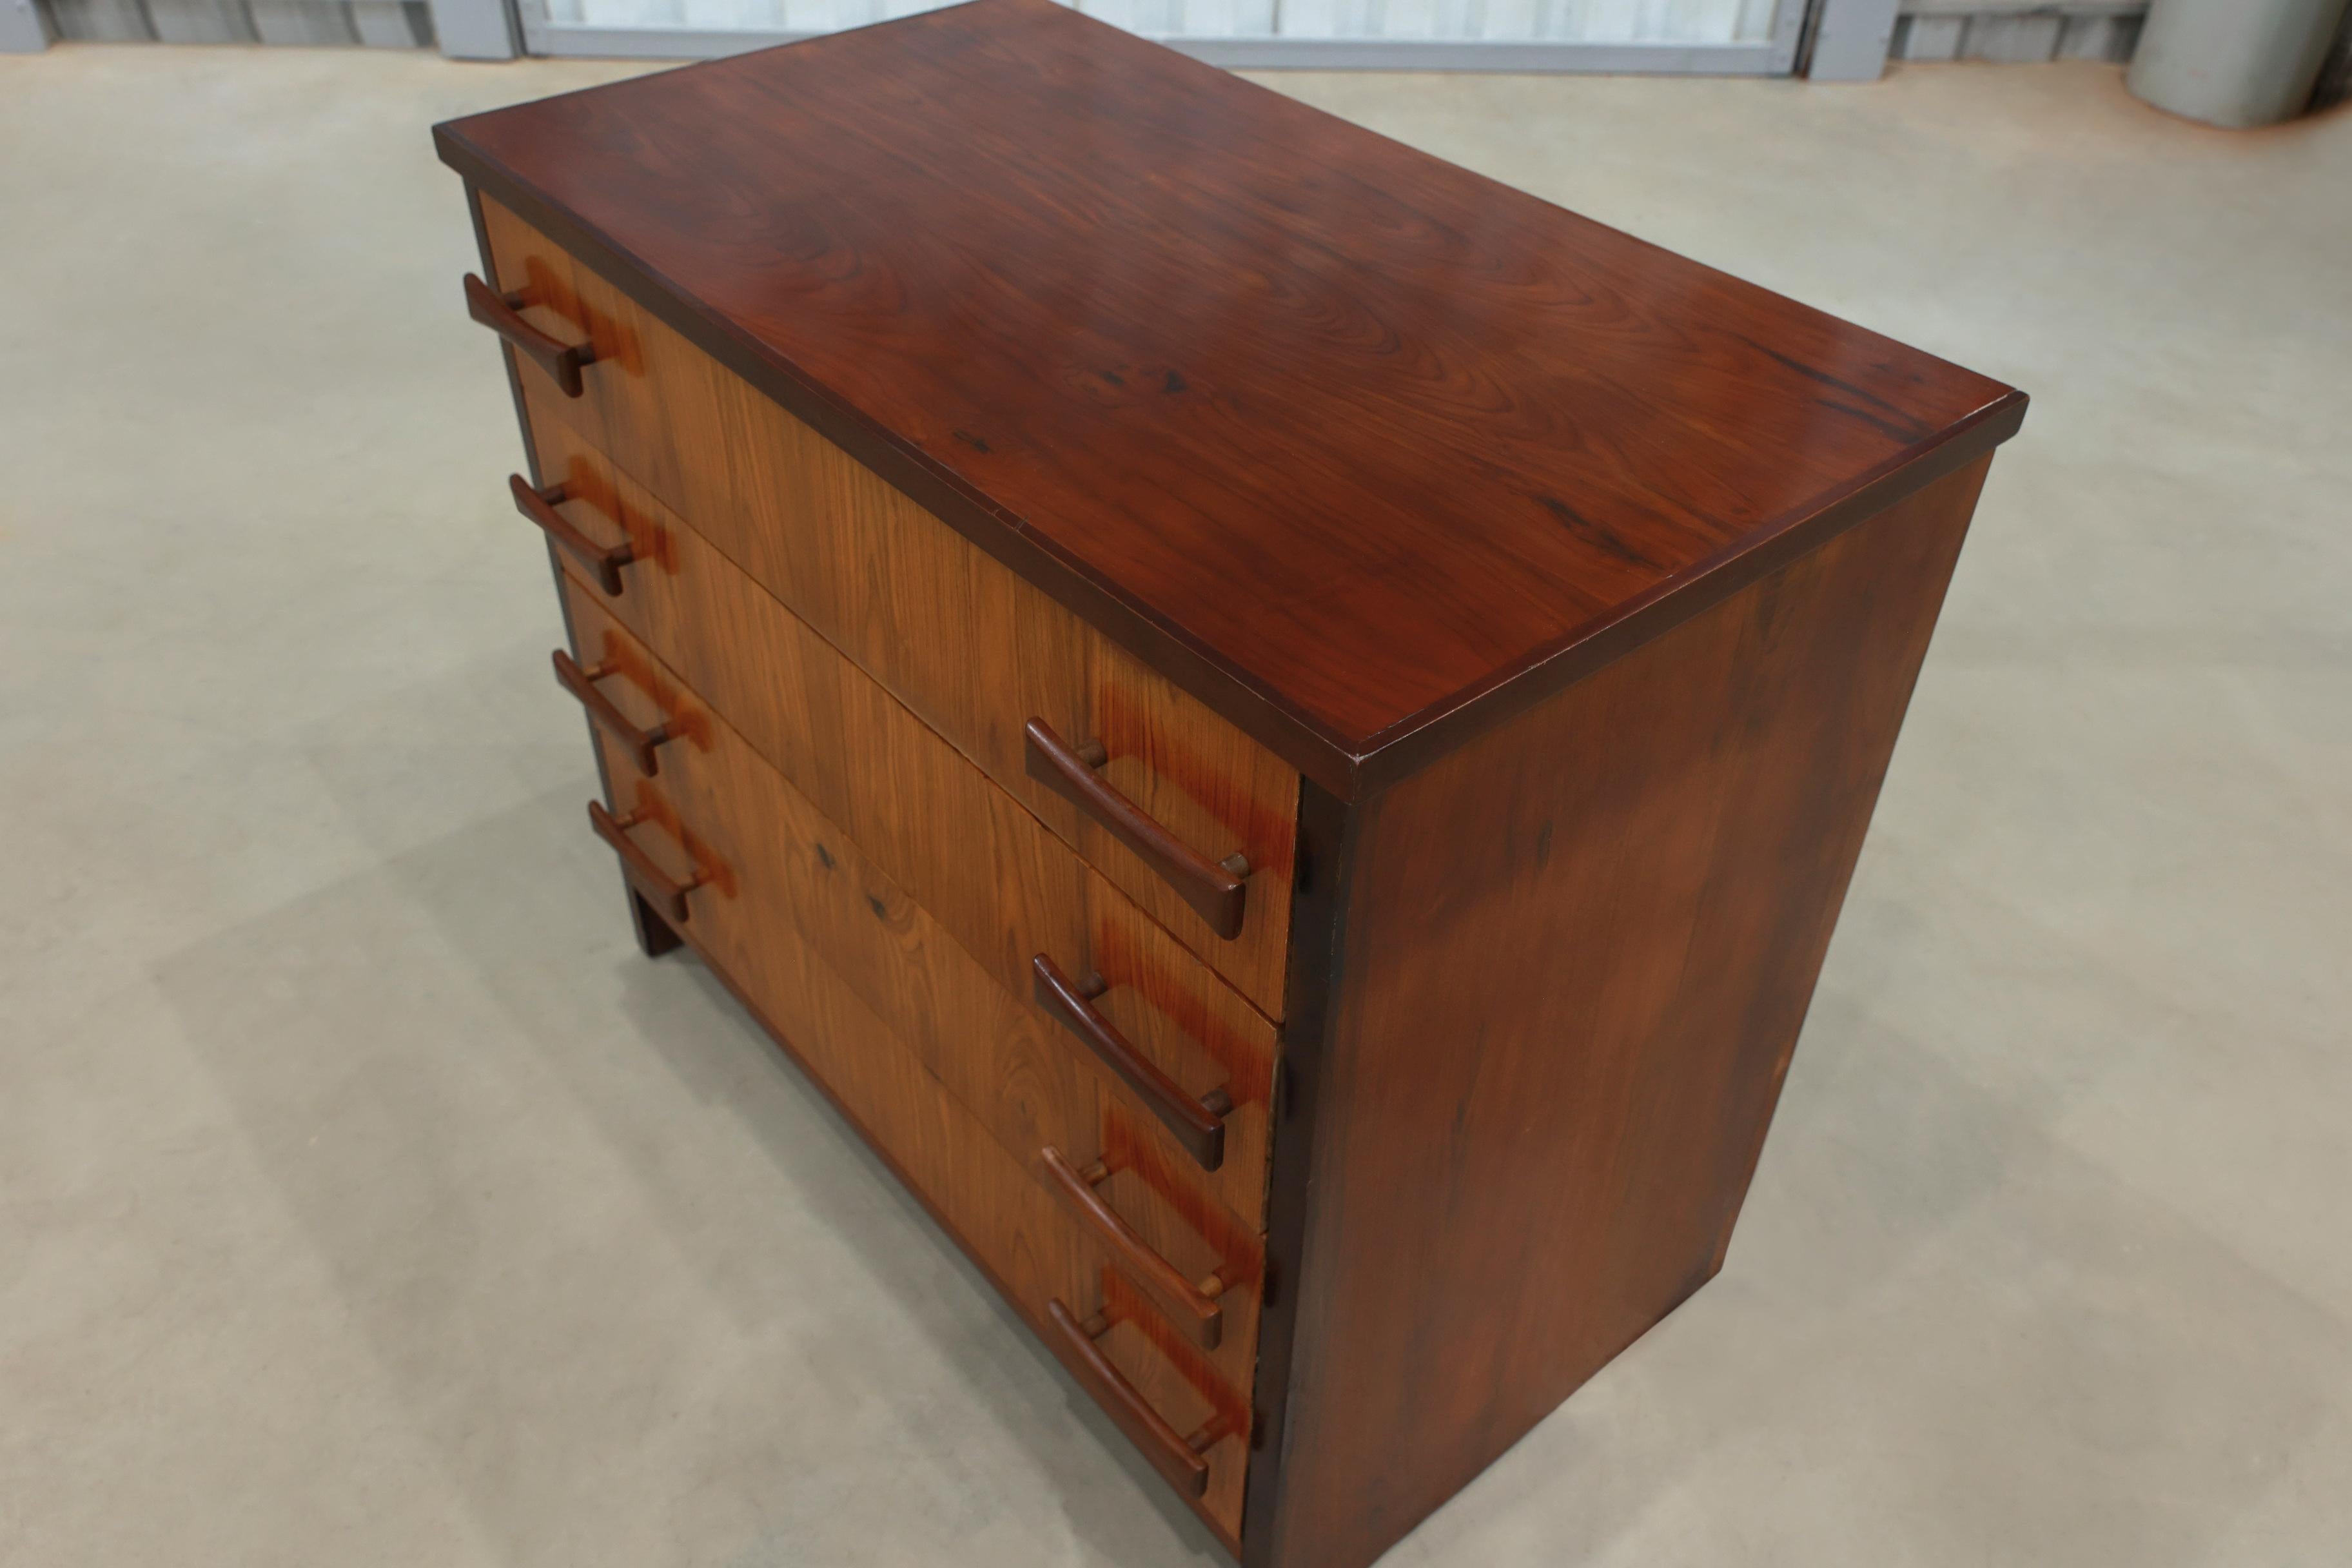 Mid-Century Modern Chest of Drawers in Caviuna wood, Unknown, c. 1950 For Sale 1